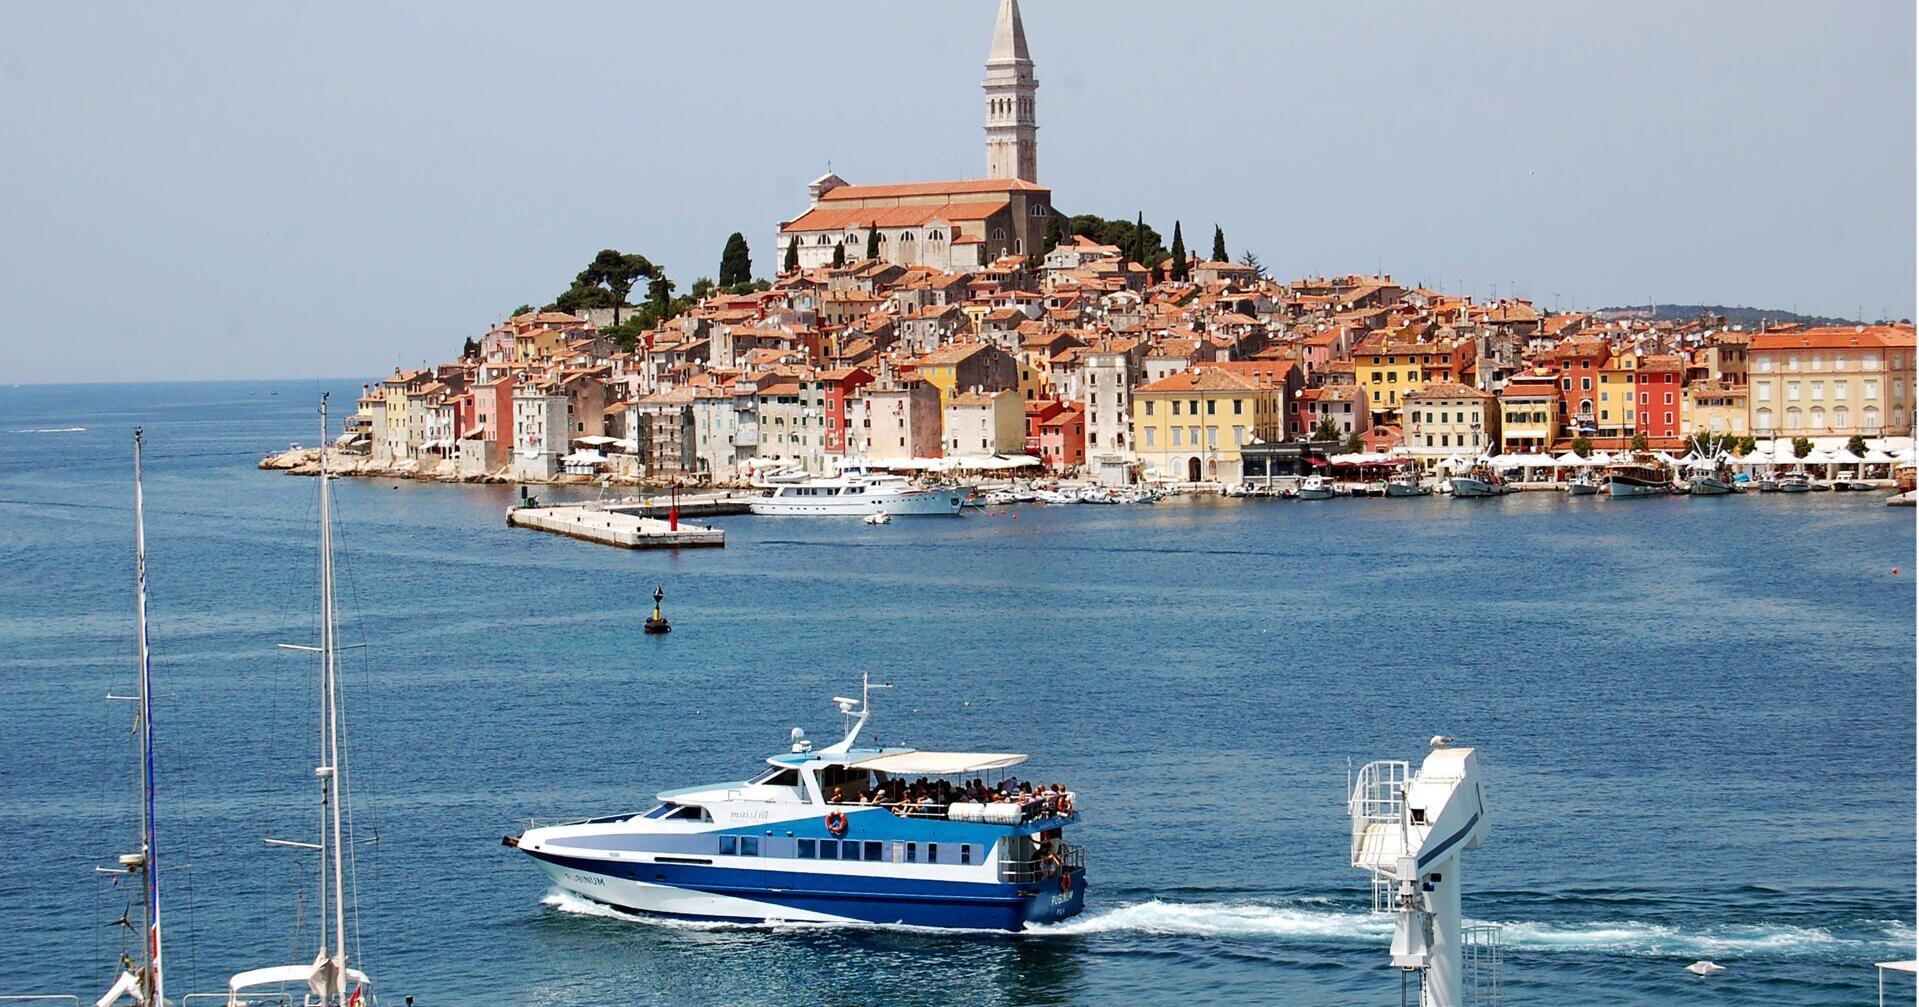 Rick Steves’ Europe: From hill towns to harbors, Istria pleases